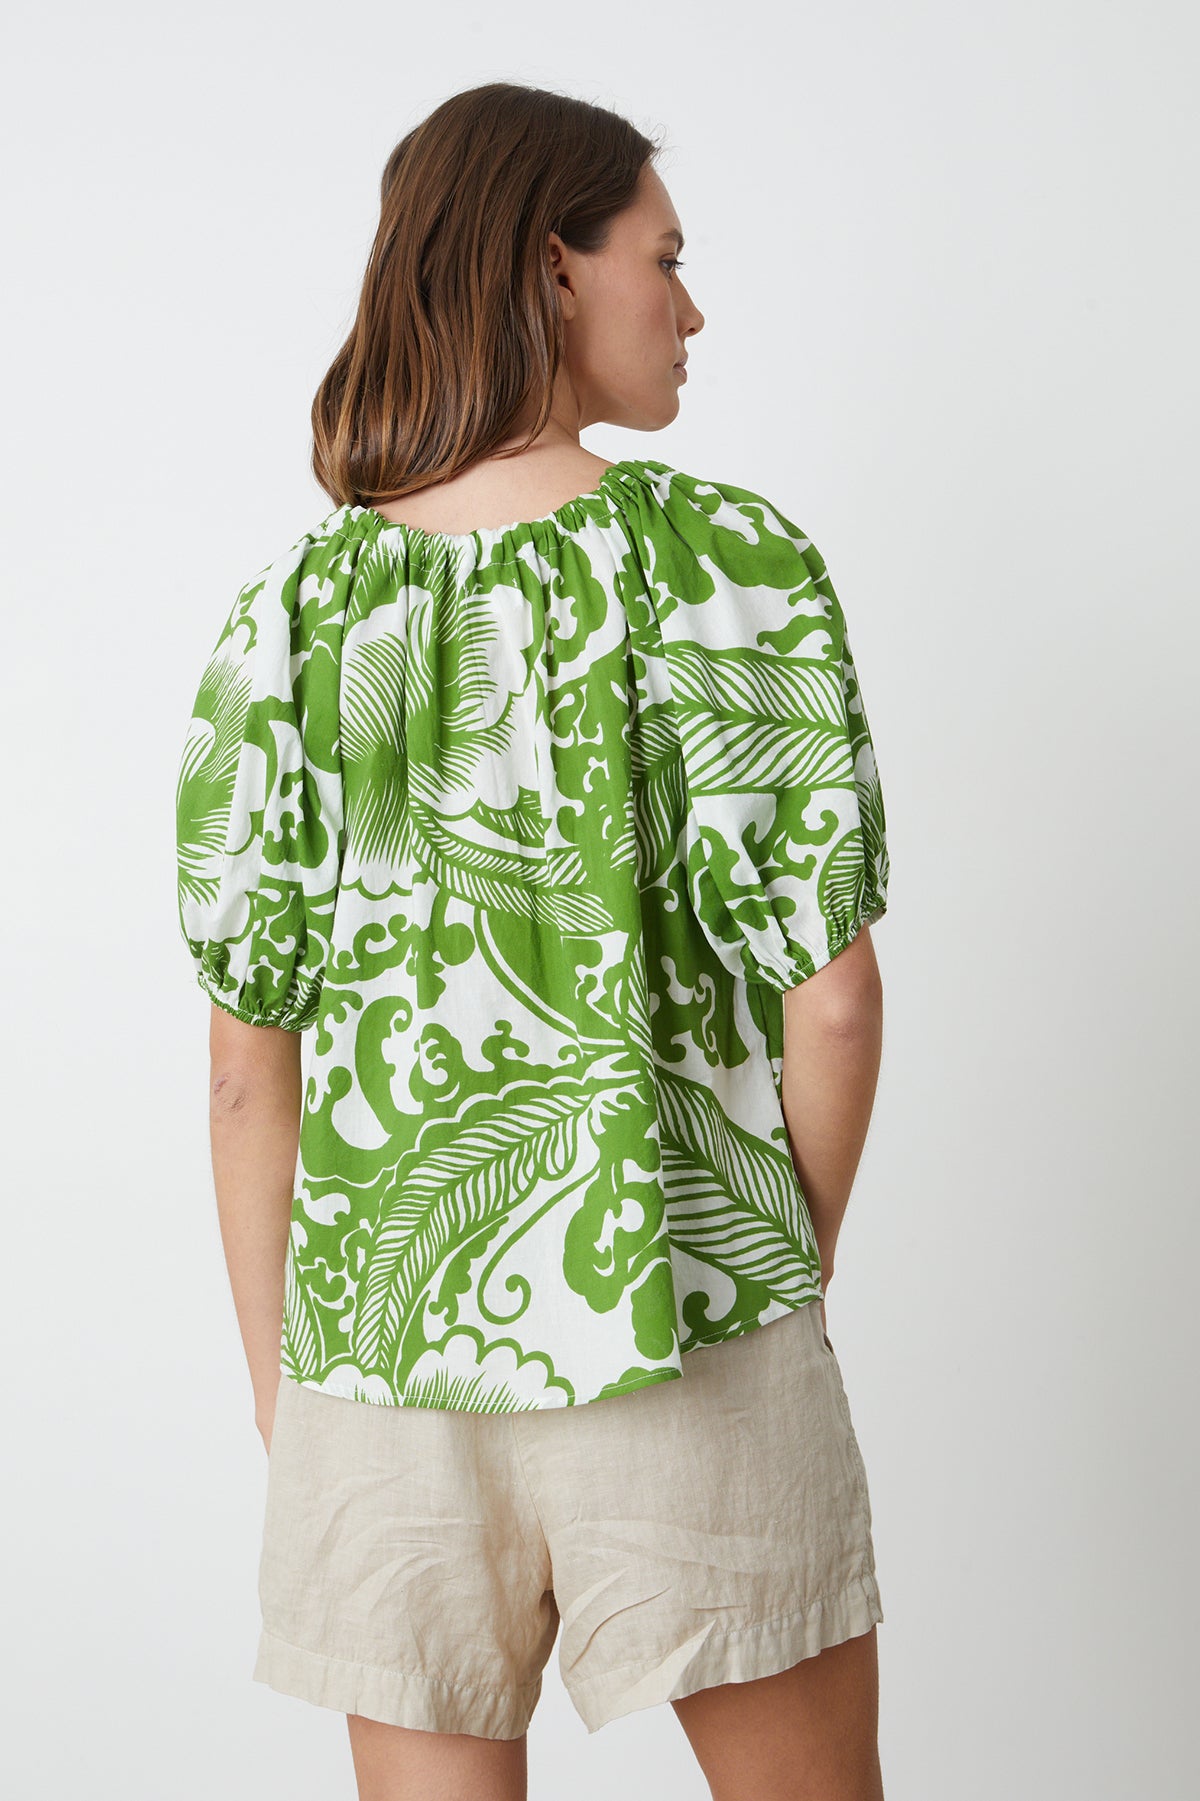 the back view of a woman wearing a Velvet by Graham & Spencer ANGELA PRINTED BOHO TOP.-26342685147329